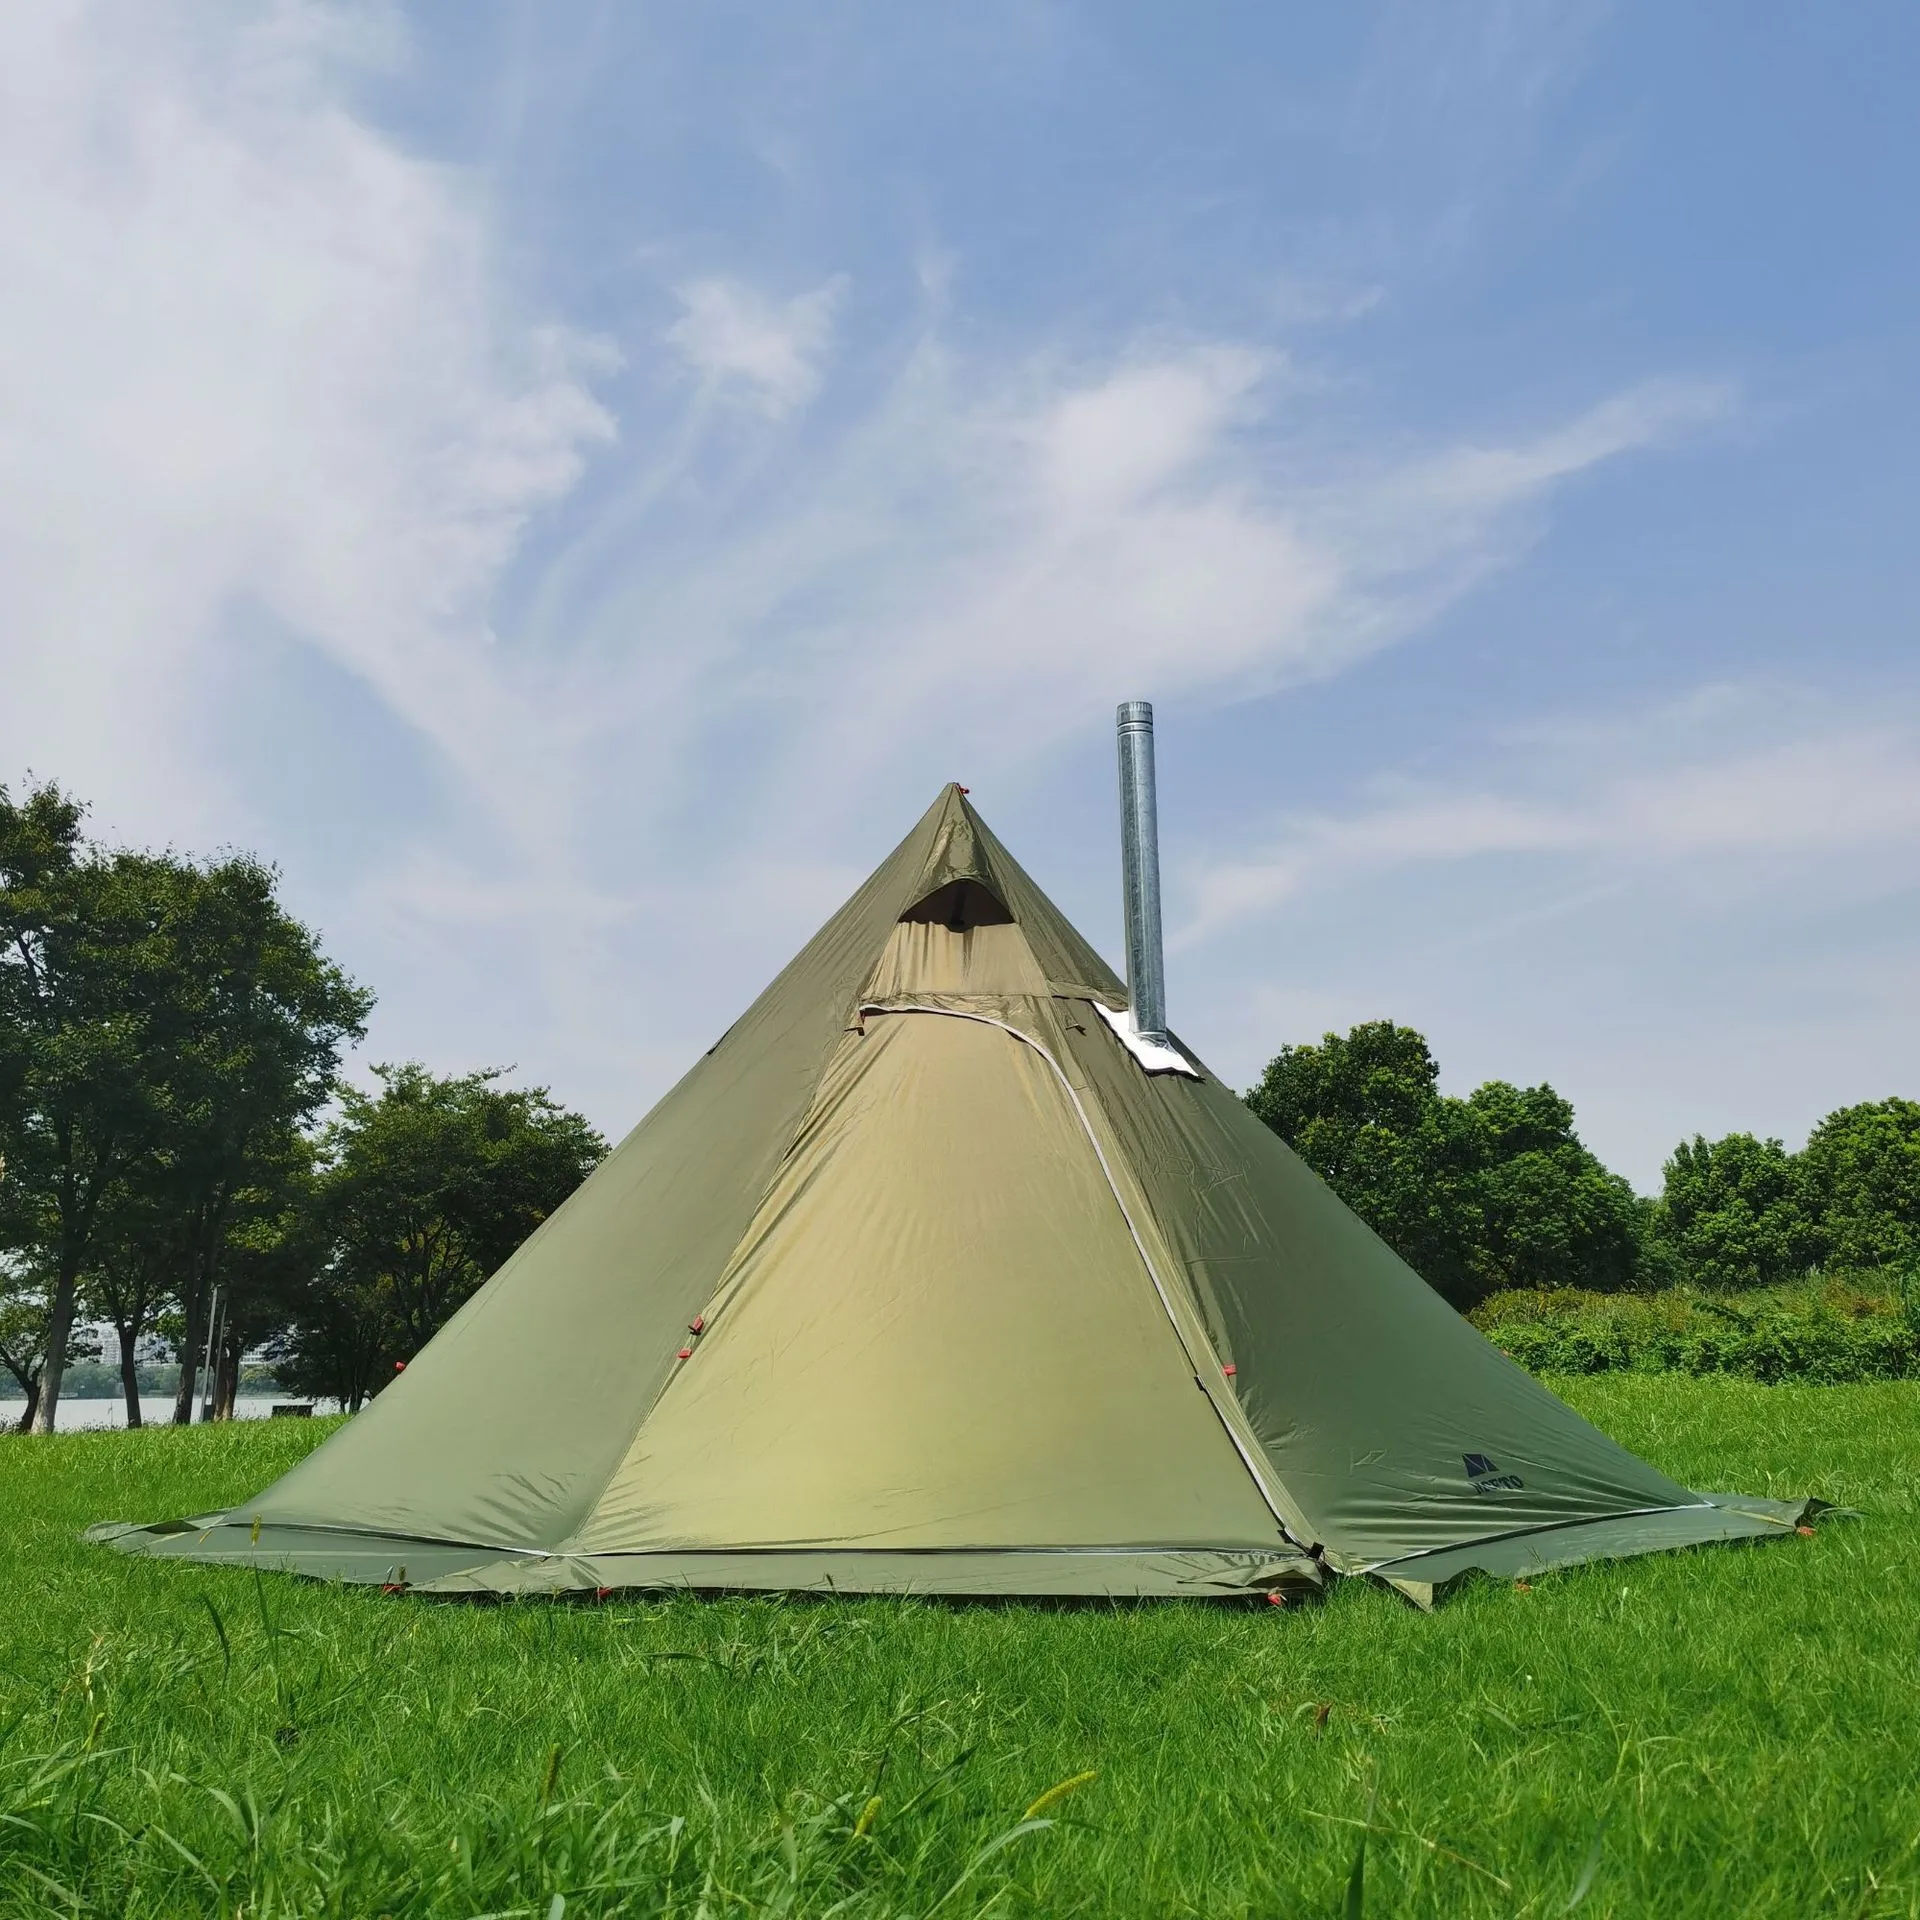 Outdoor Camping Waterproof Teepee Tent Flame-retardant Pyramid Hot Tent 1 Person - $138.90